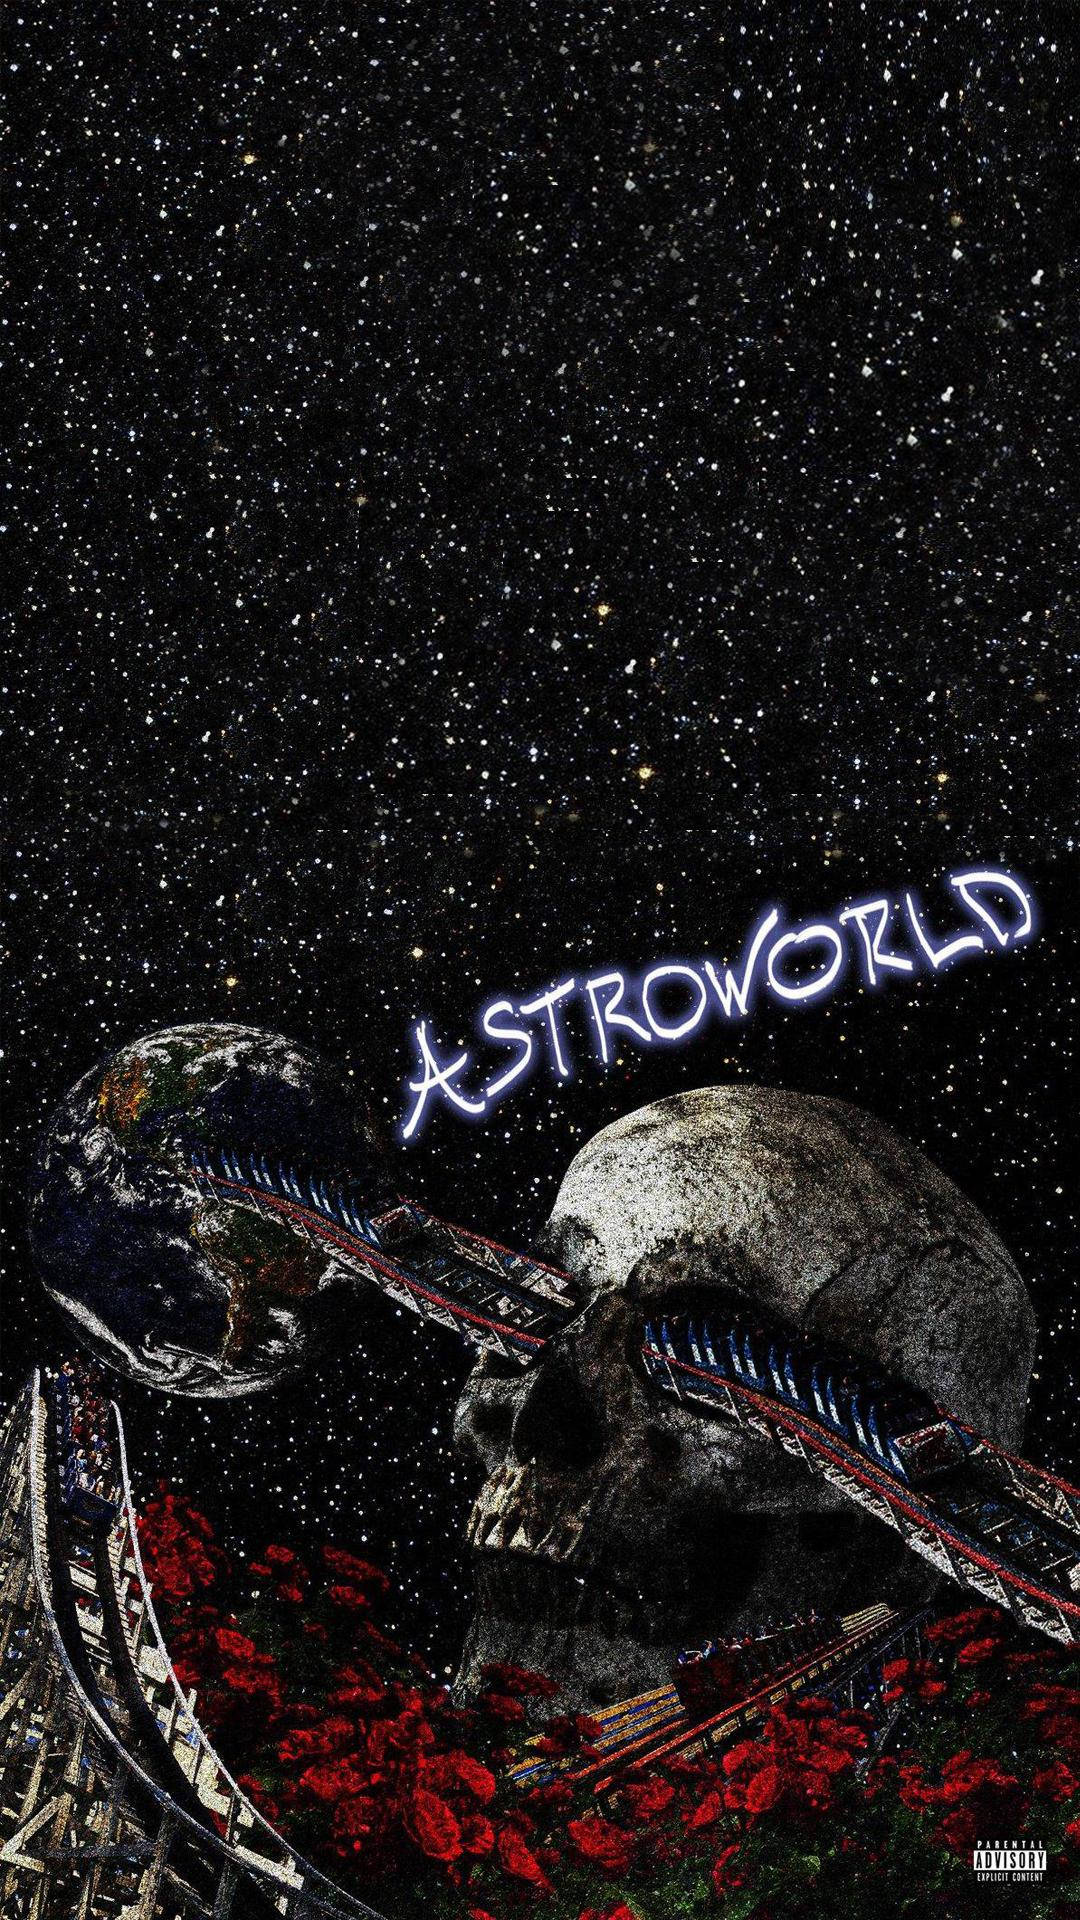 Painted Vinyl Record Astroworld -  India